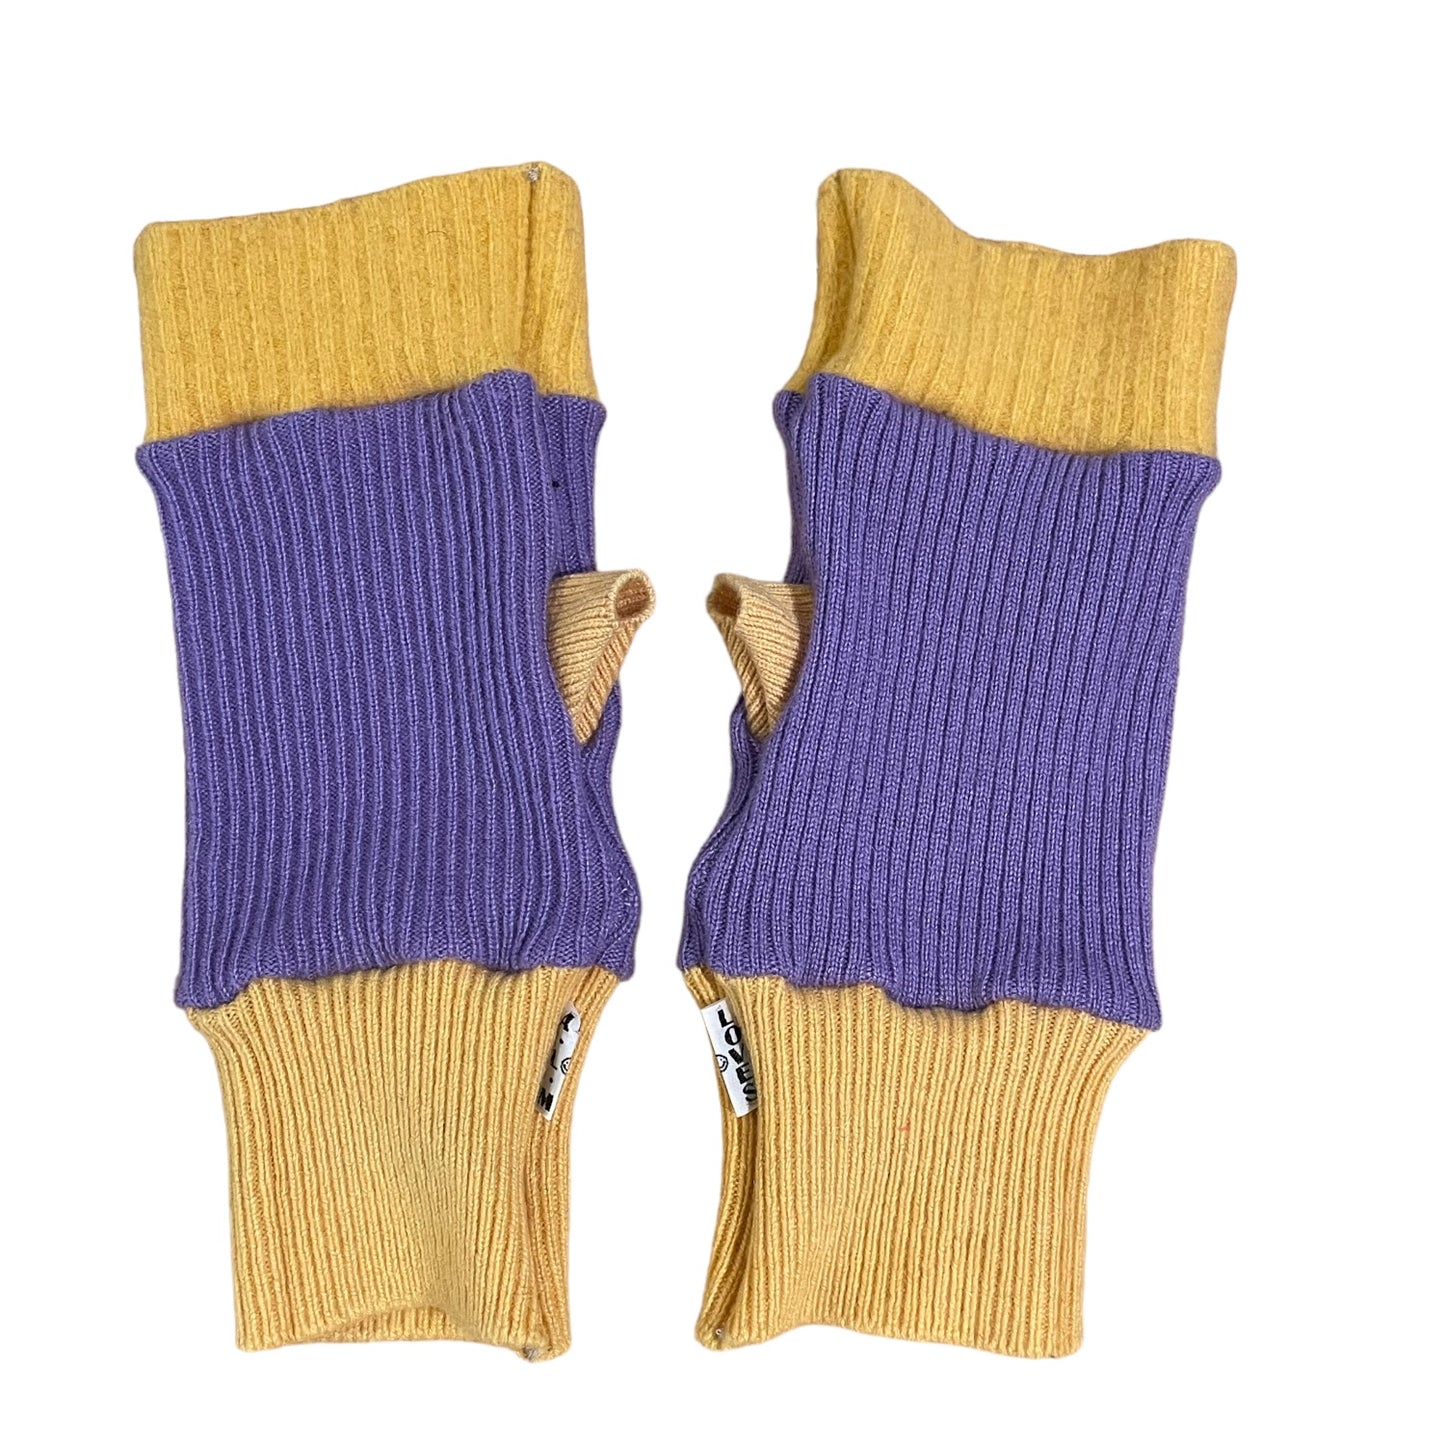 Recycled Cashmere Hand Warmer gloves #14